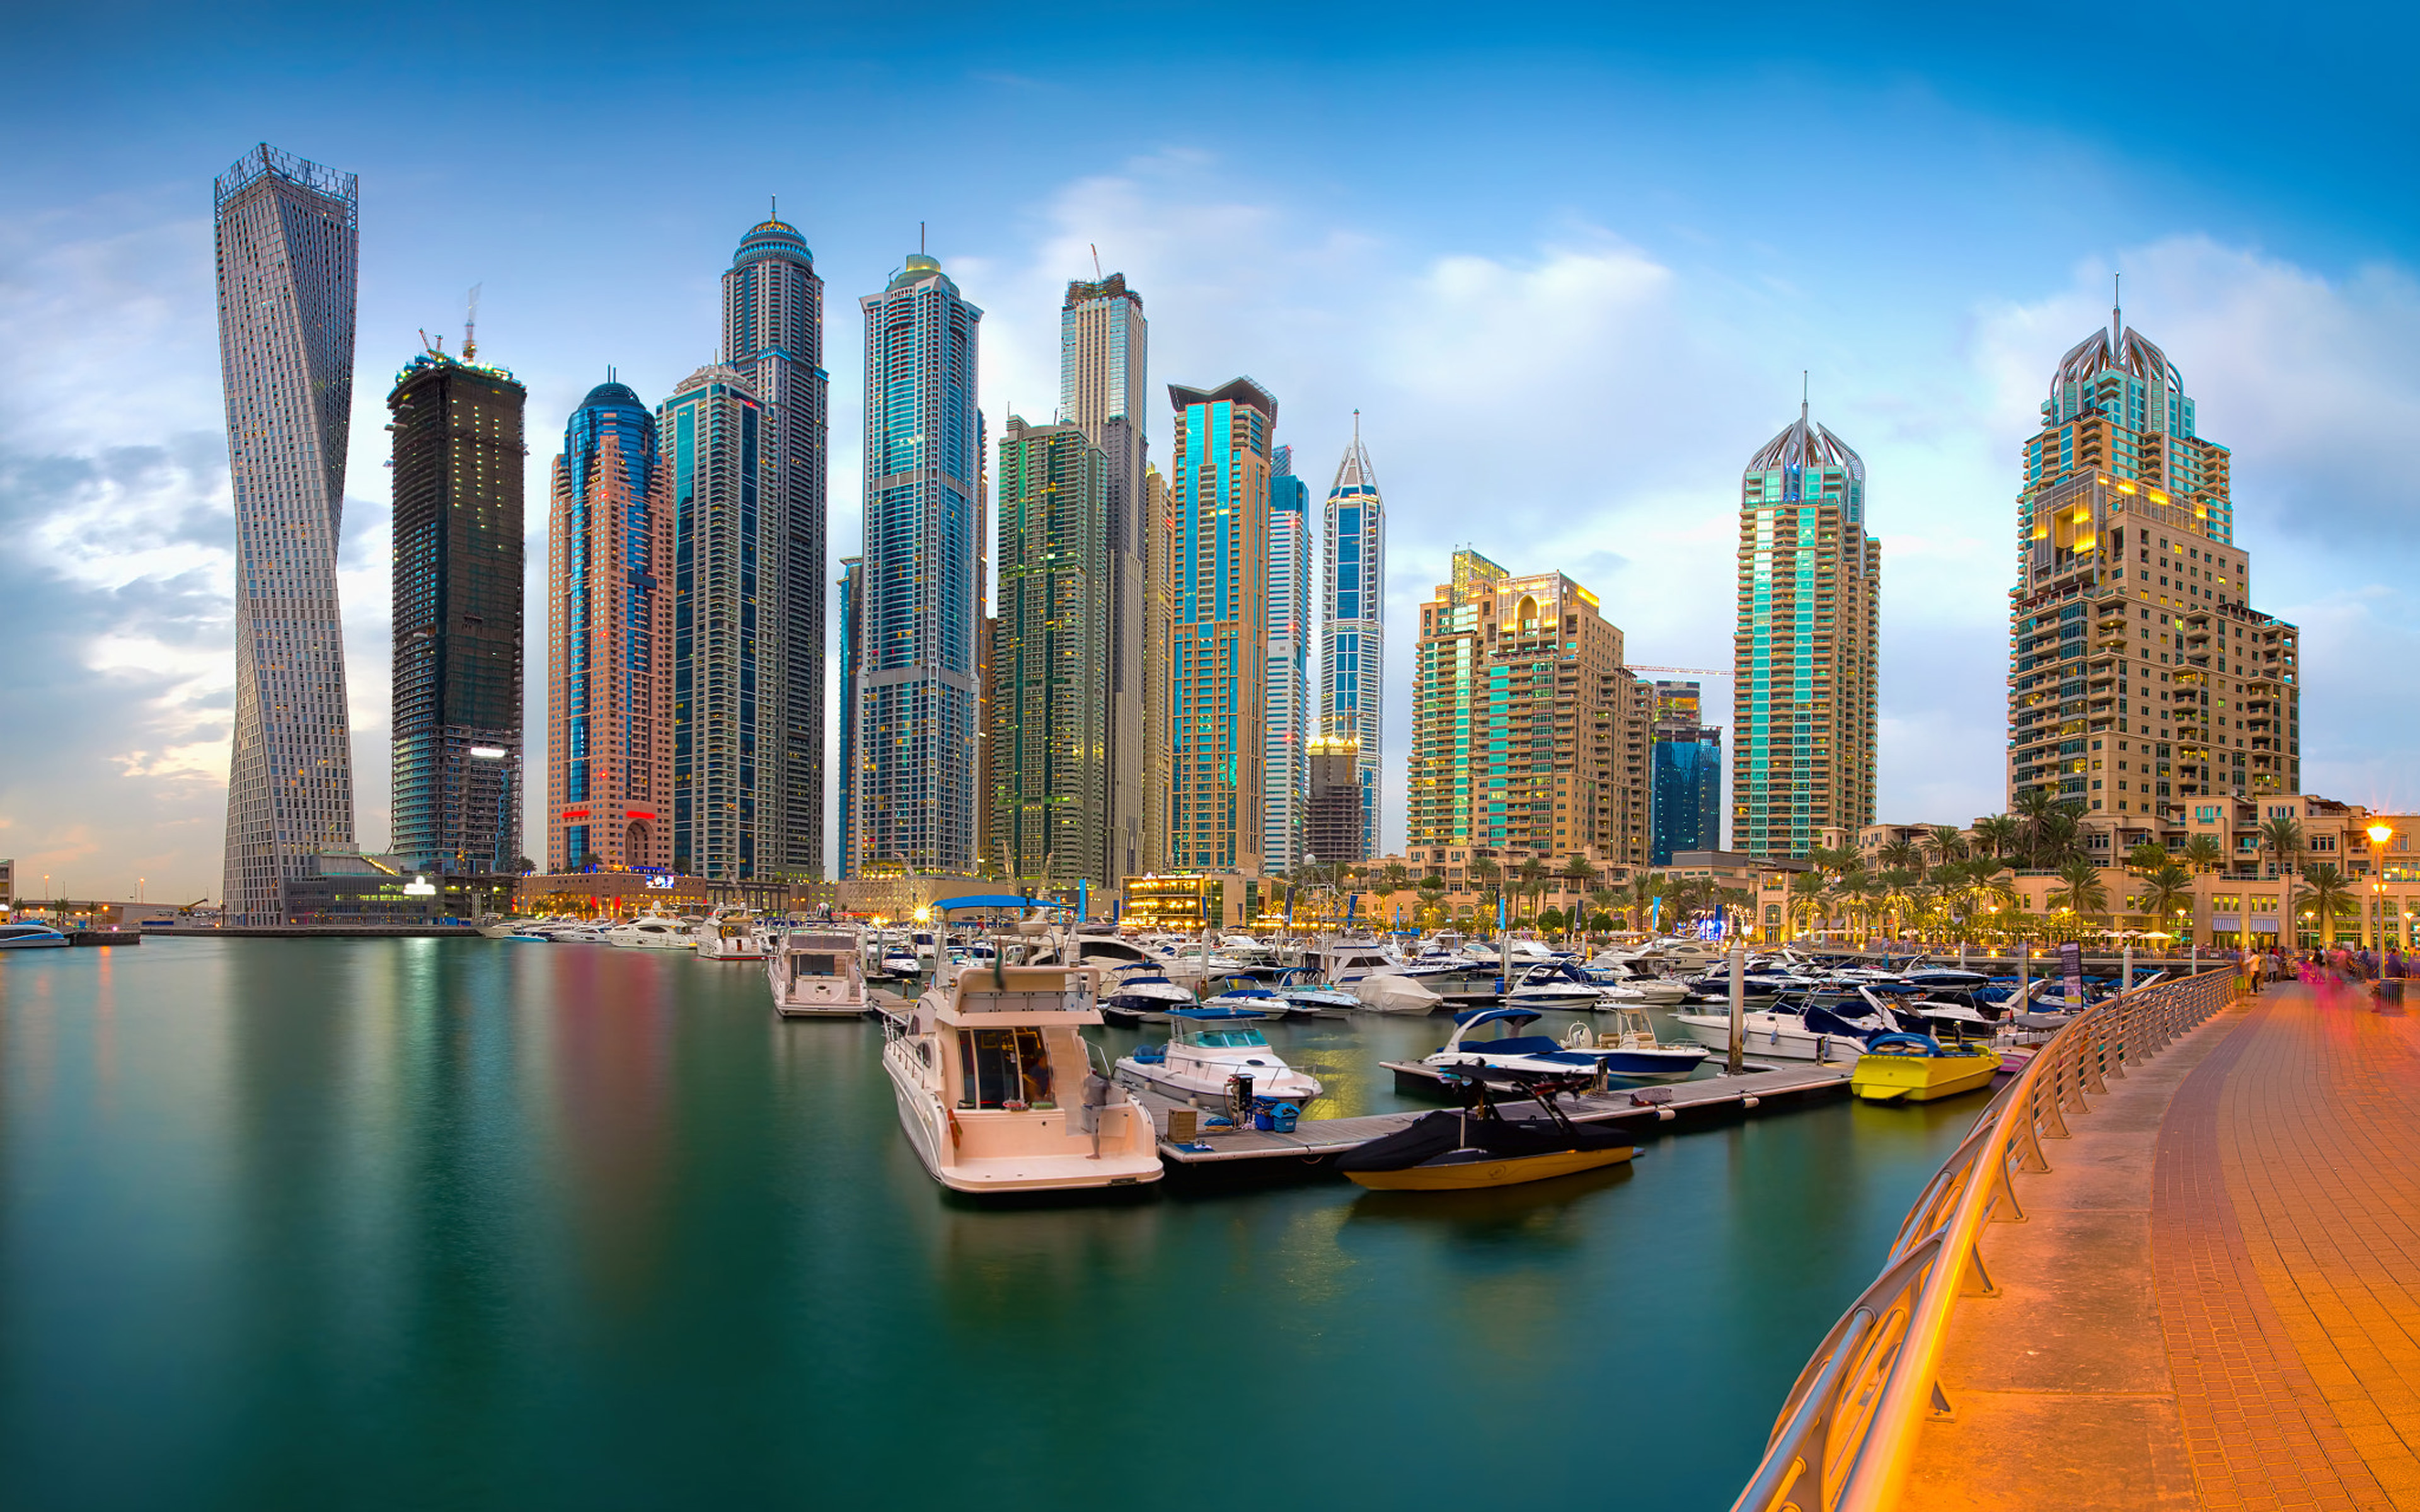 Dubai Marina Cayan Tower 306 Meter Tall 75 Story Skyscraperobjects Arab  Emirates Ultra Hd Desktop Wallpapers For Computers Laptop Tablet And Mobile  Phones : 